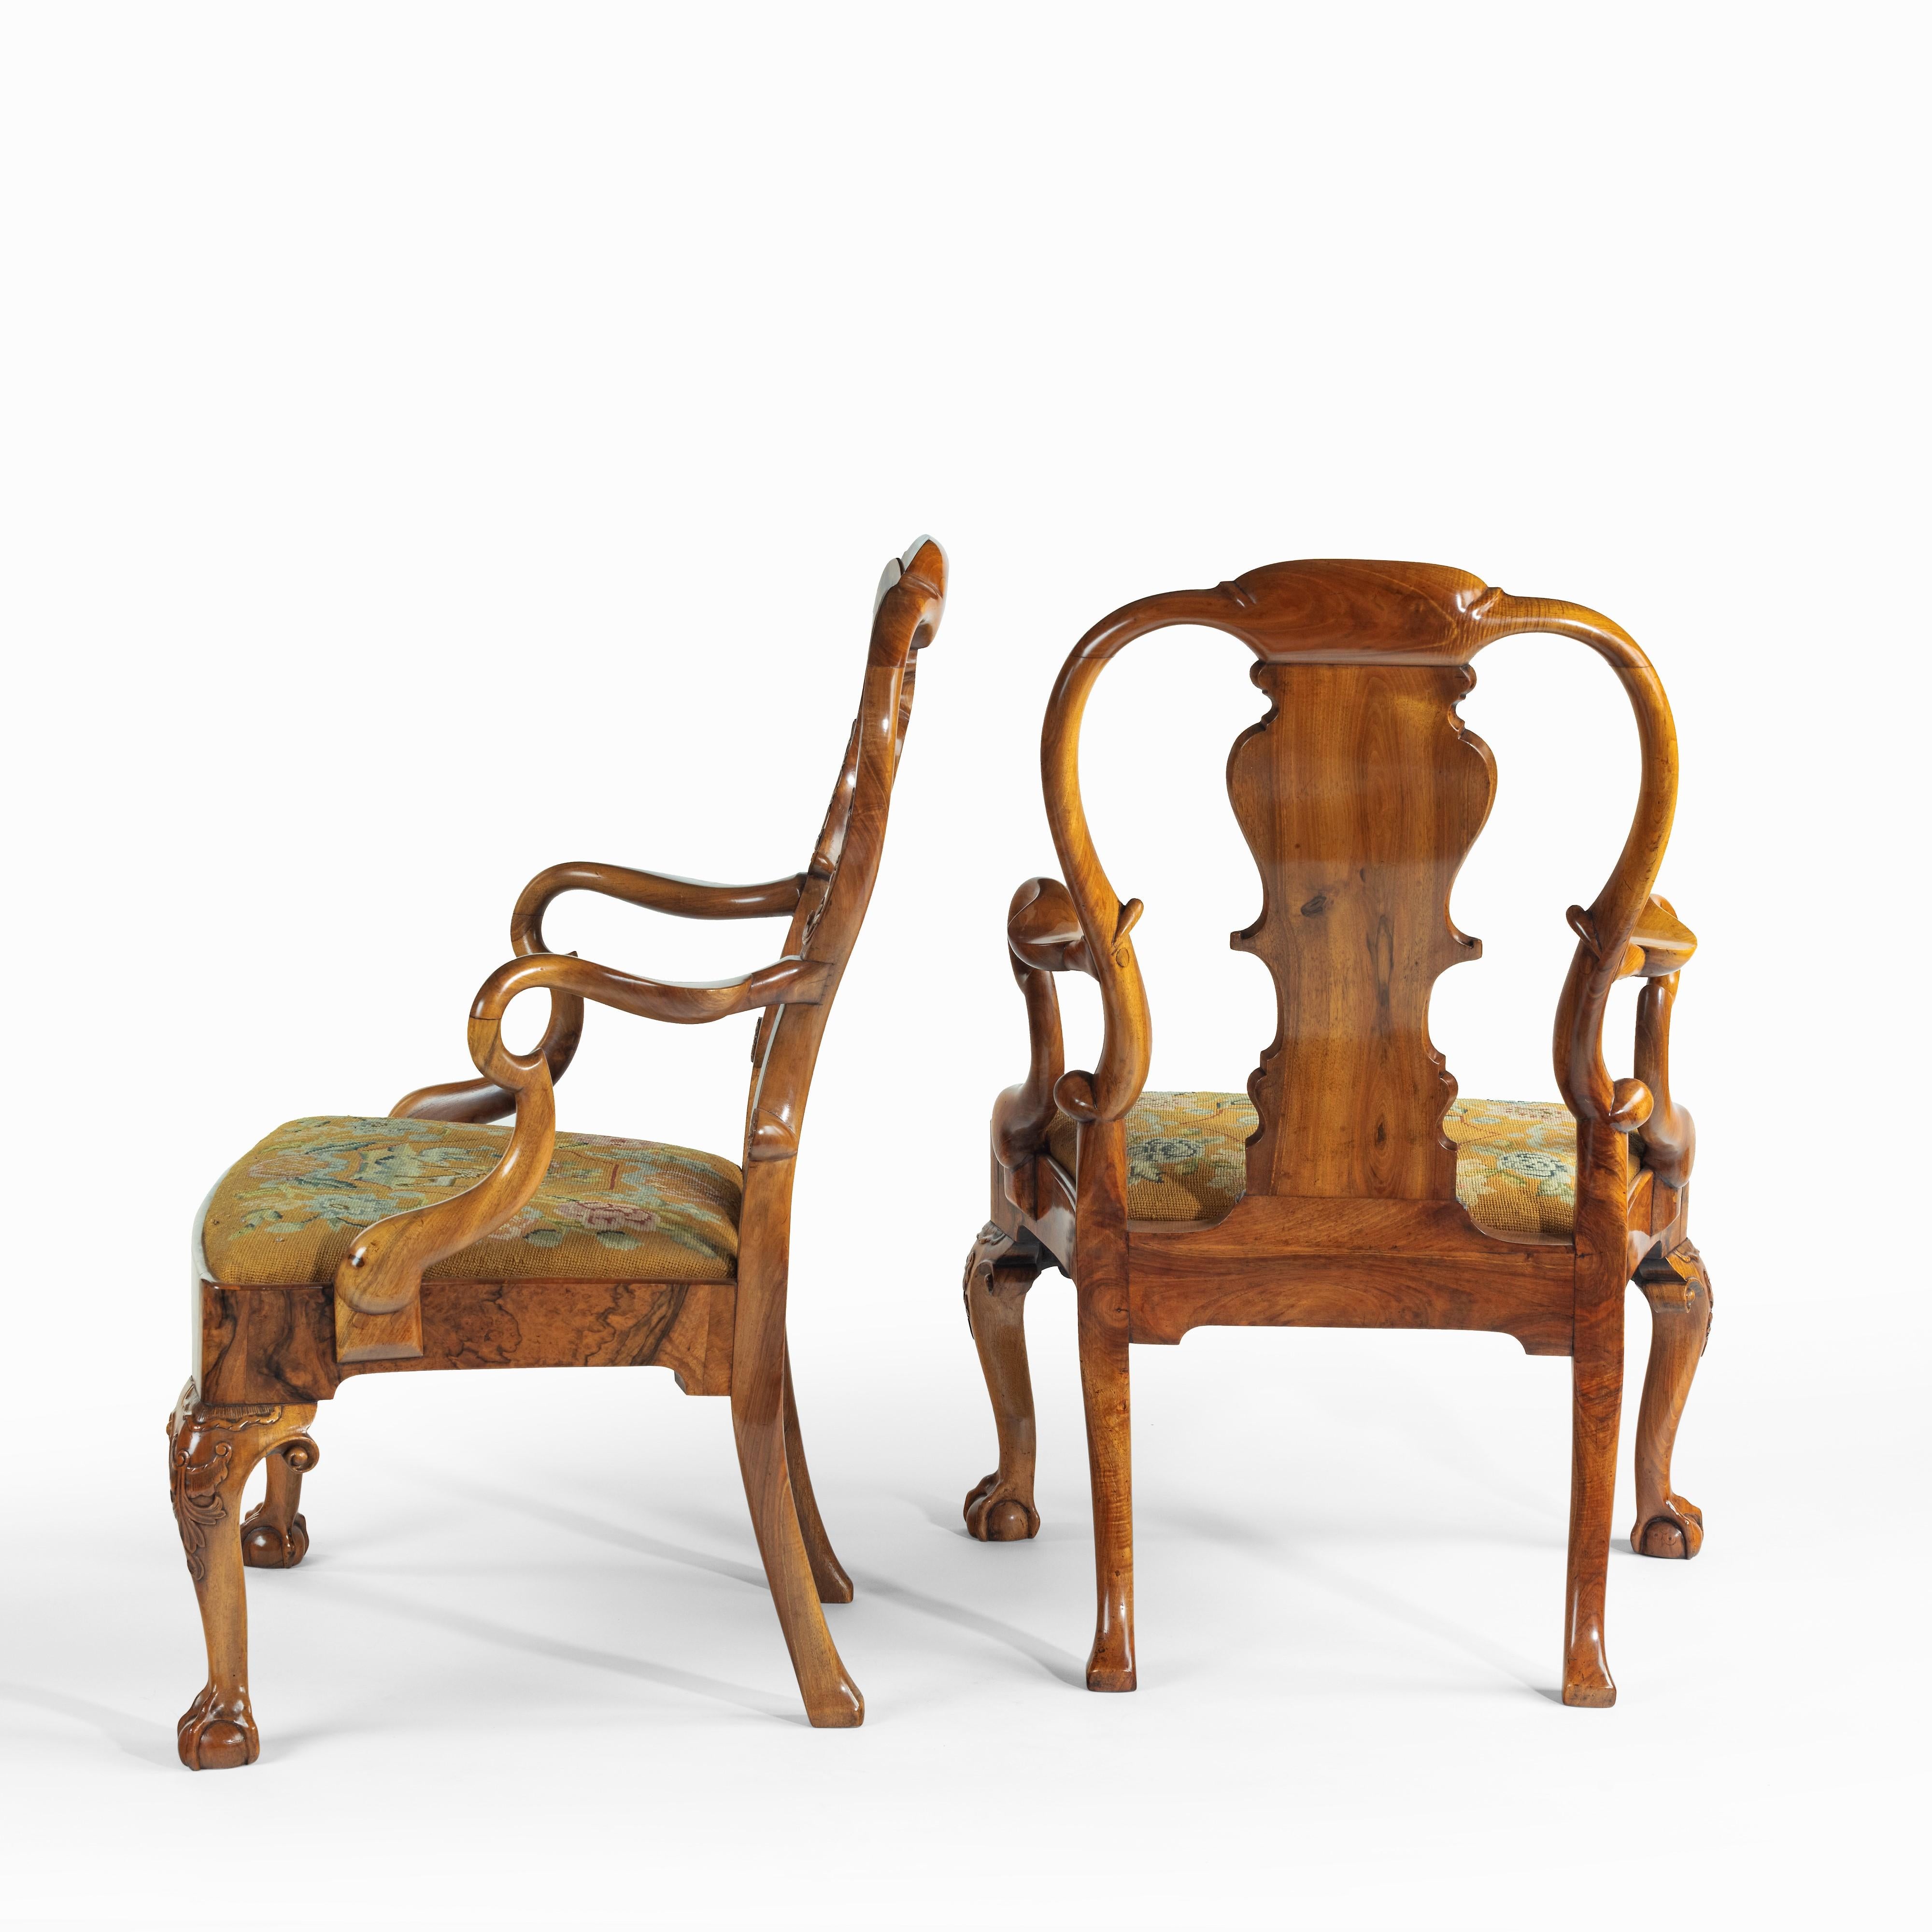 A pair of George II style walnut open arm chairs, possibly by Charles Tozer, each with a high arched back, burr walnut vase splat and shepherds crook arms, the generous drop-in seat with the original needlework, the serpentine seat rail with a